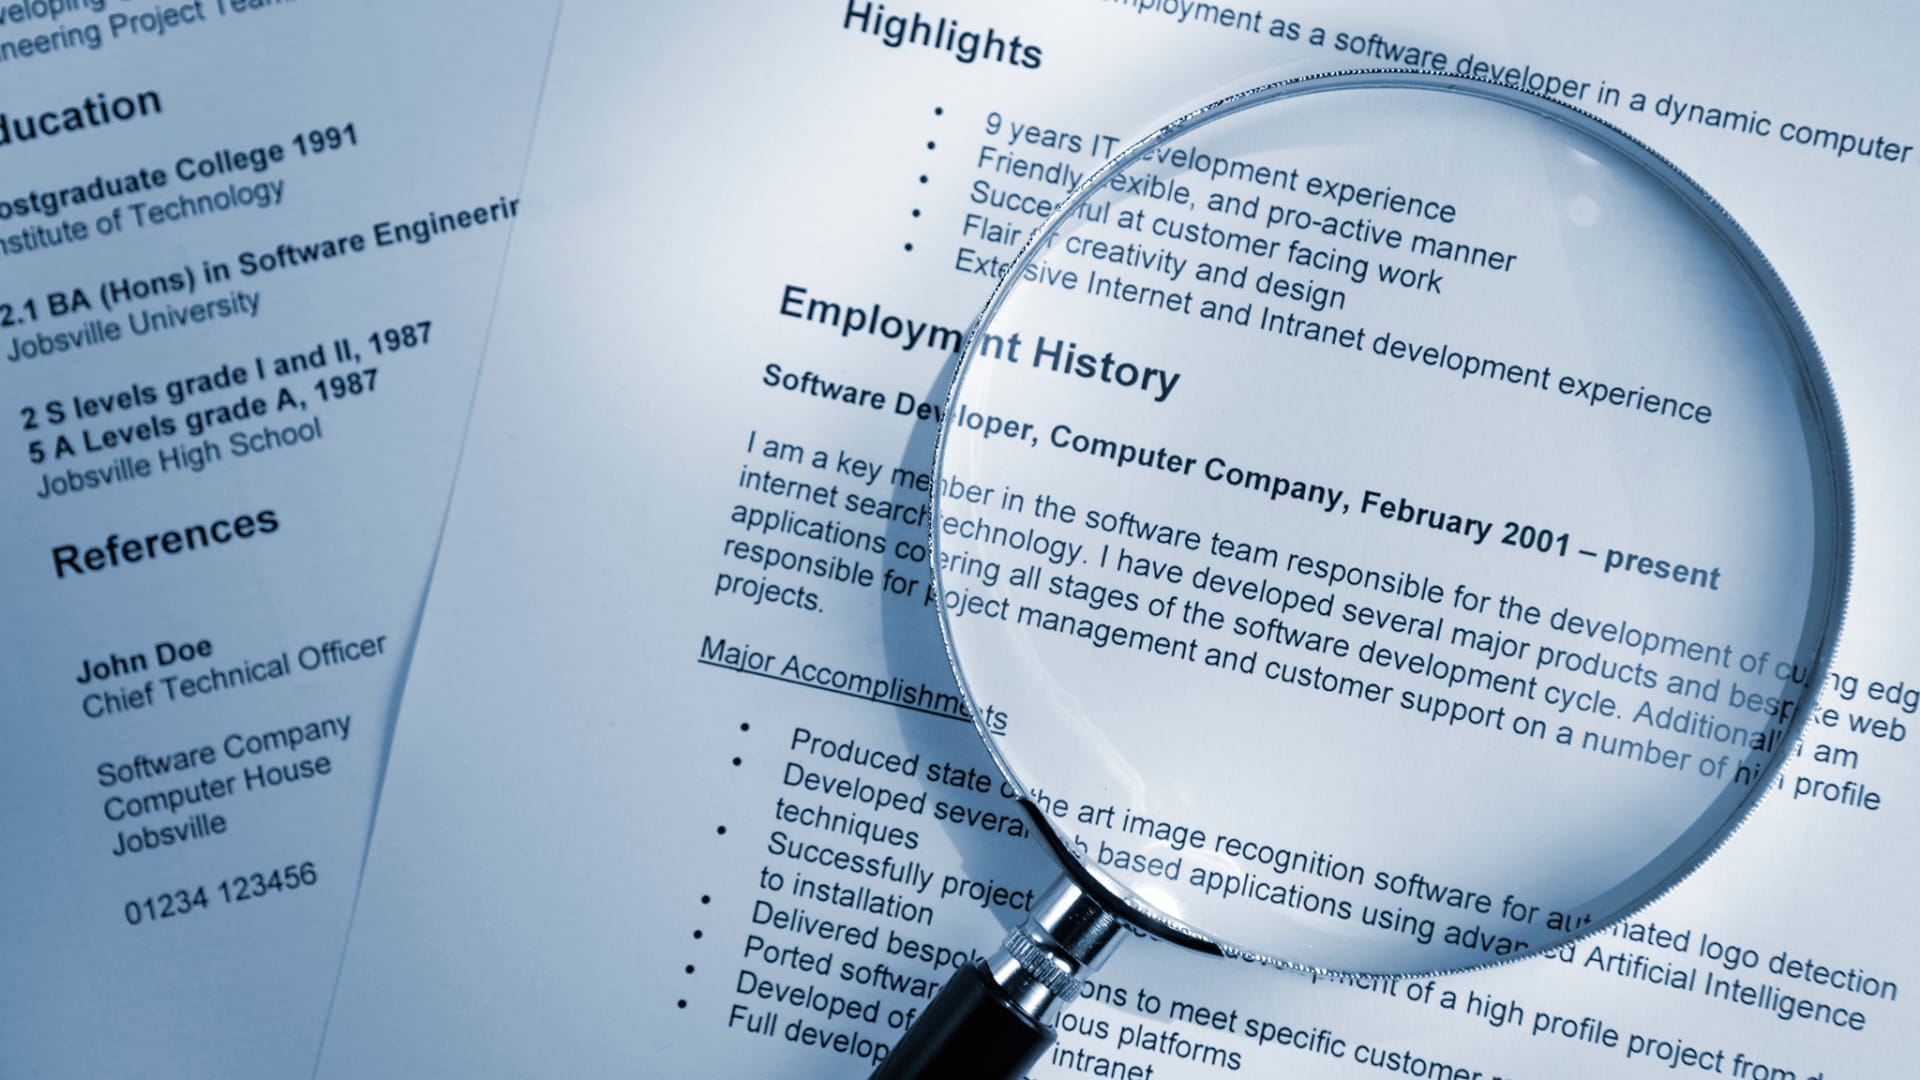 10 corporate buzzwords that show up in job listings the most—and how to use them to land a role